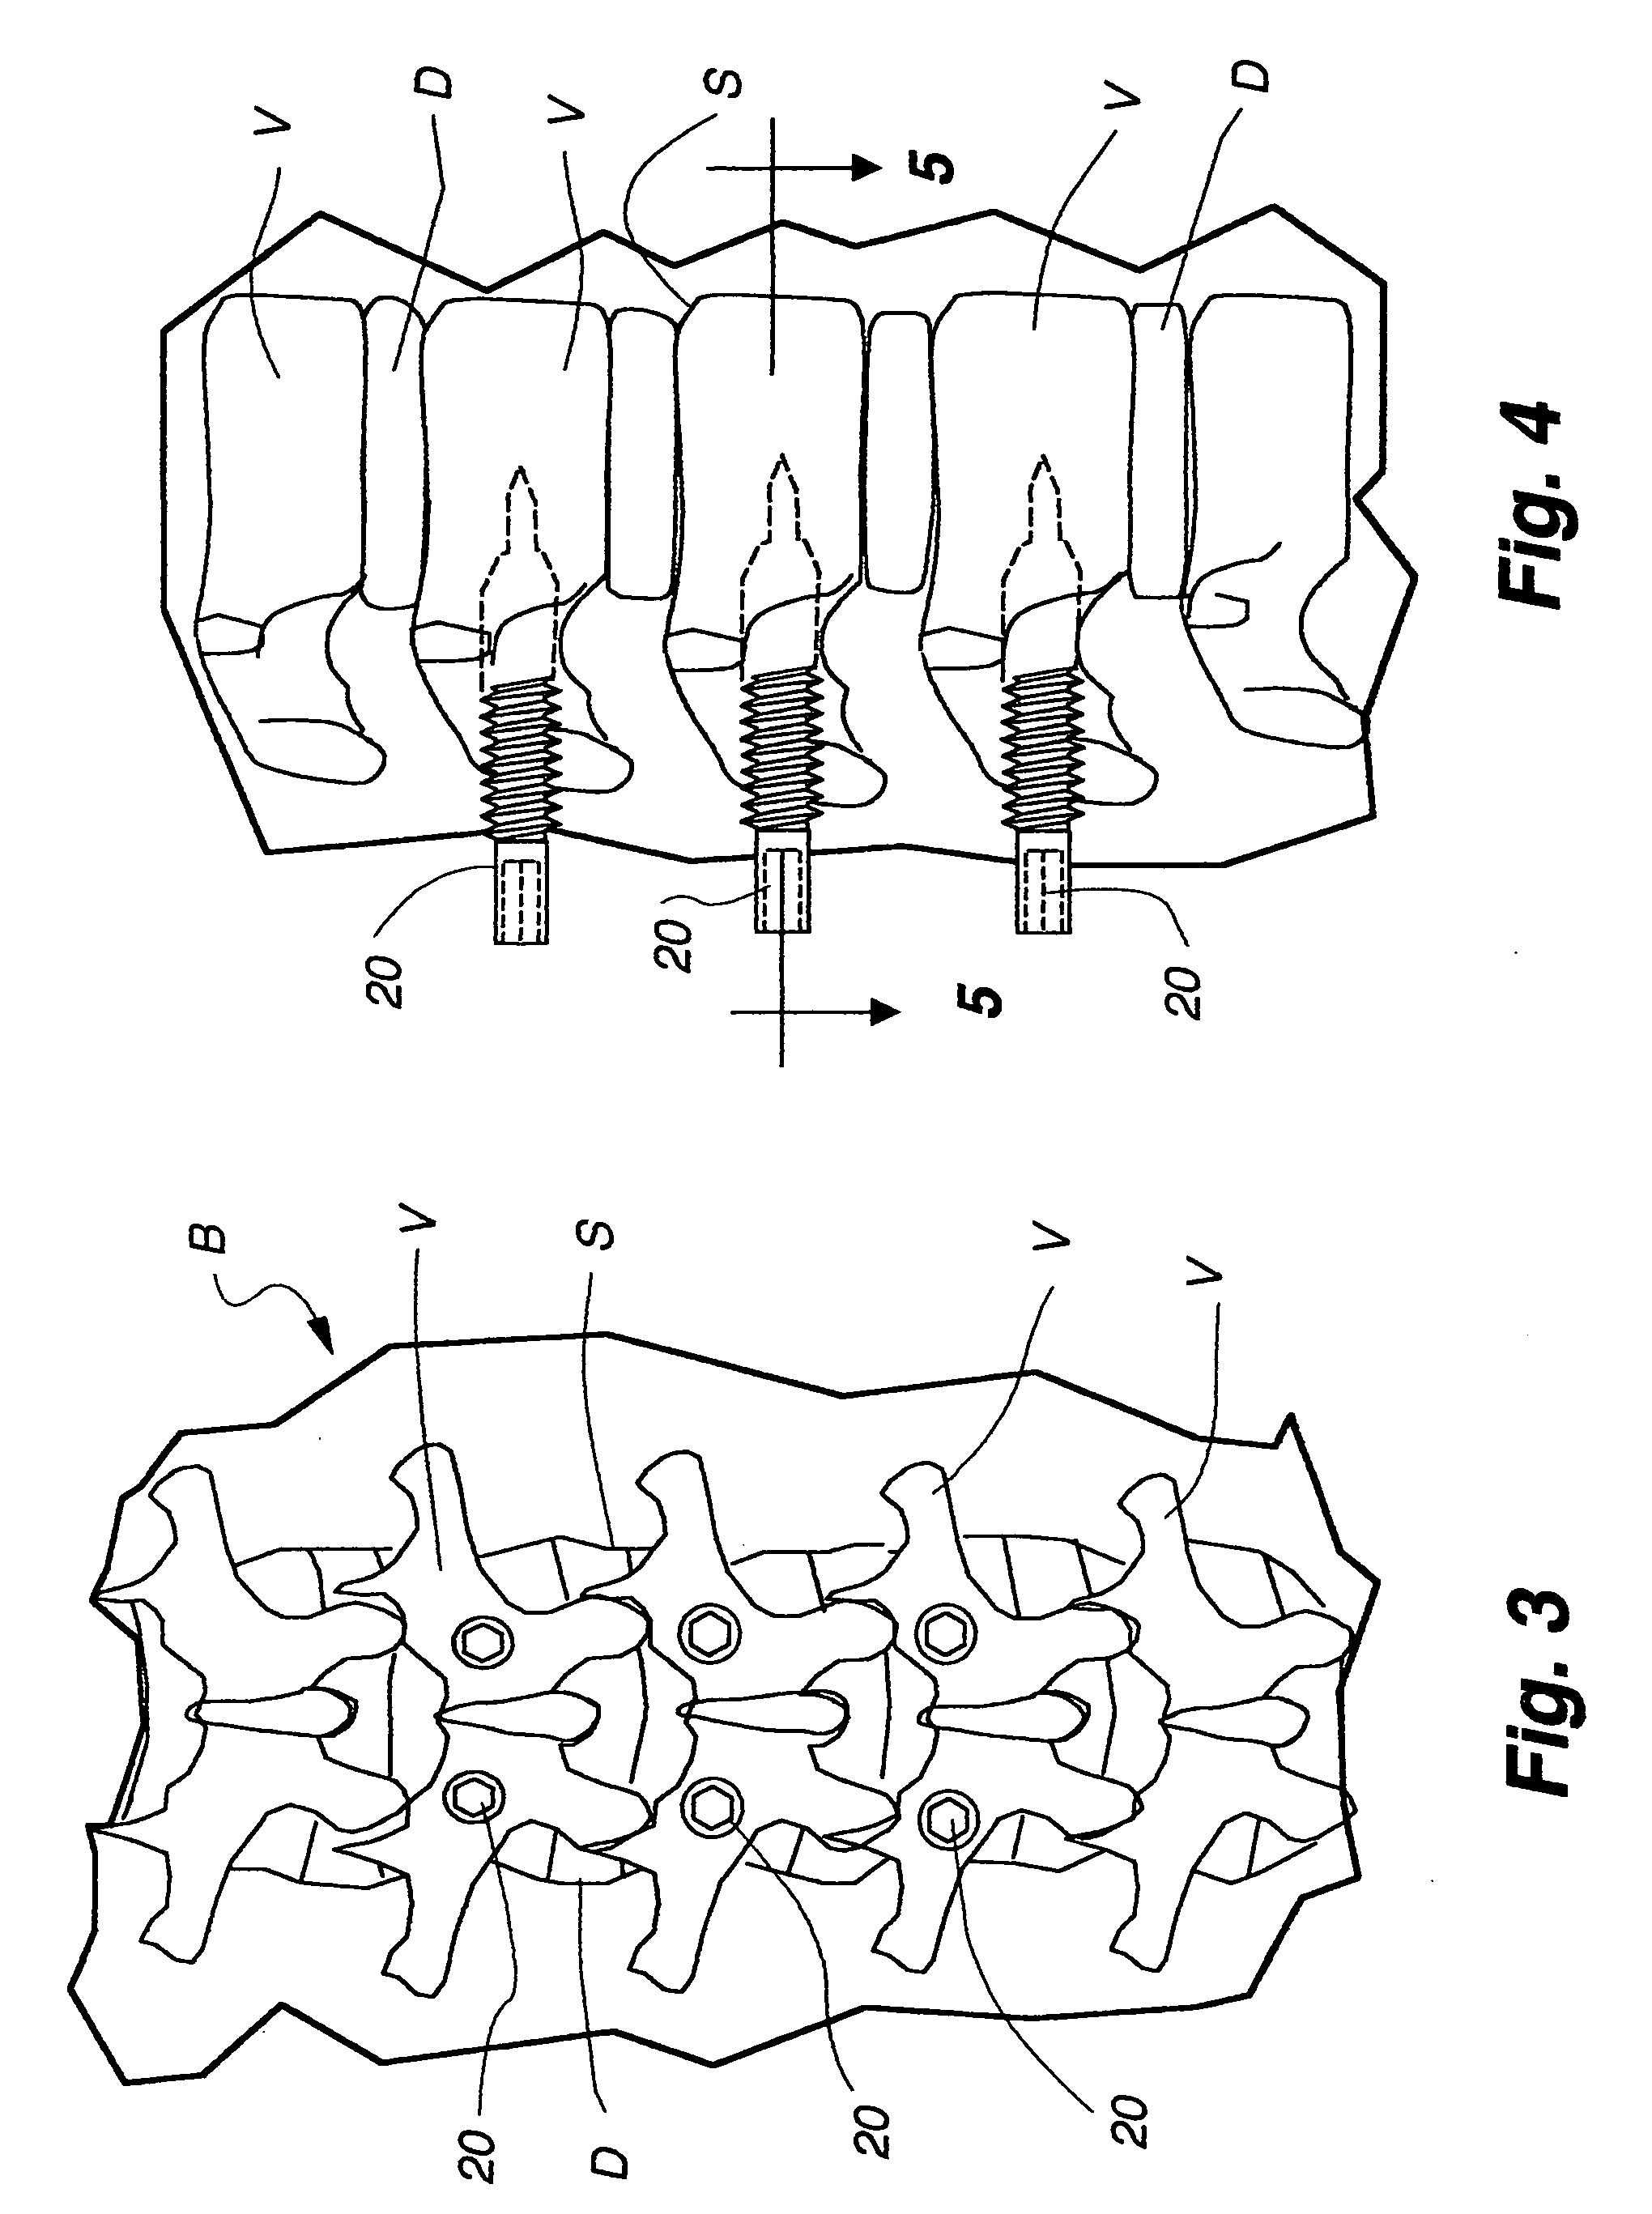 Minimally invasive pedicle screw and guide support